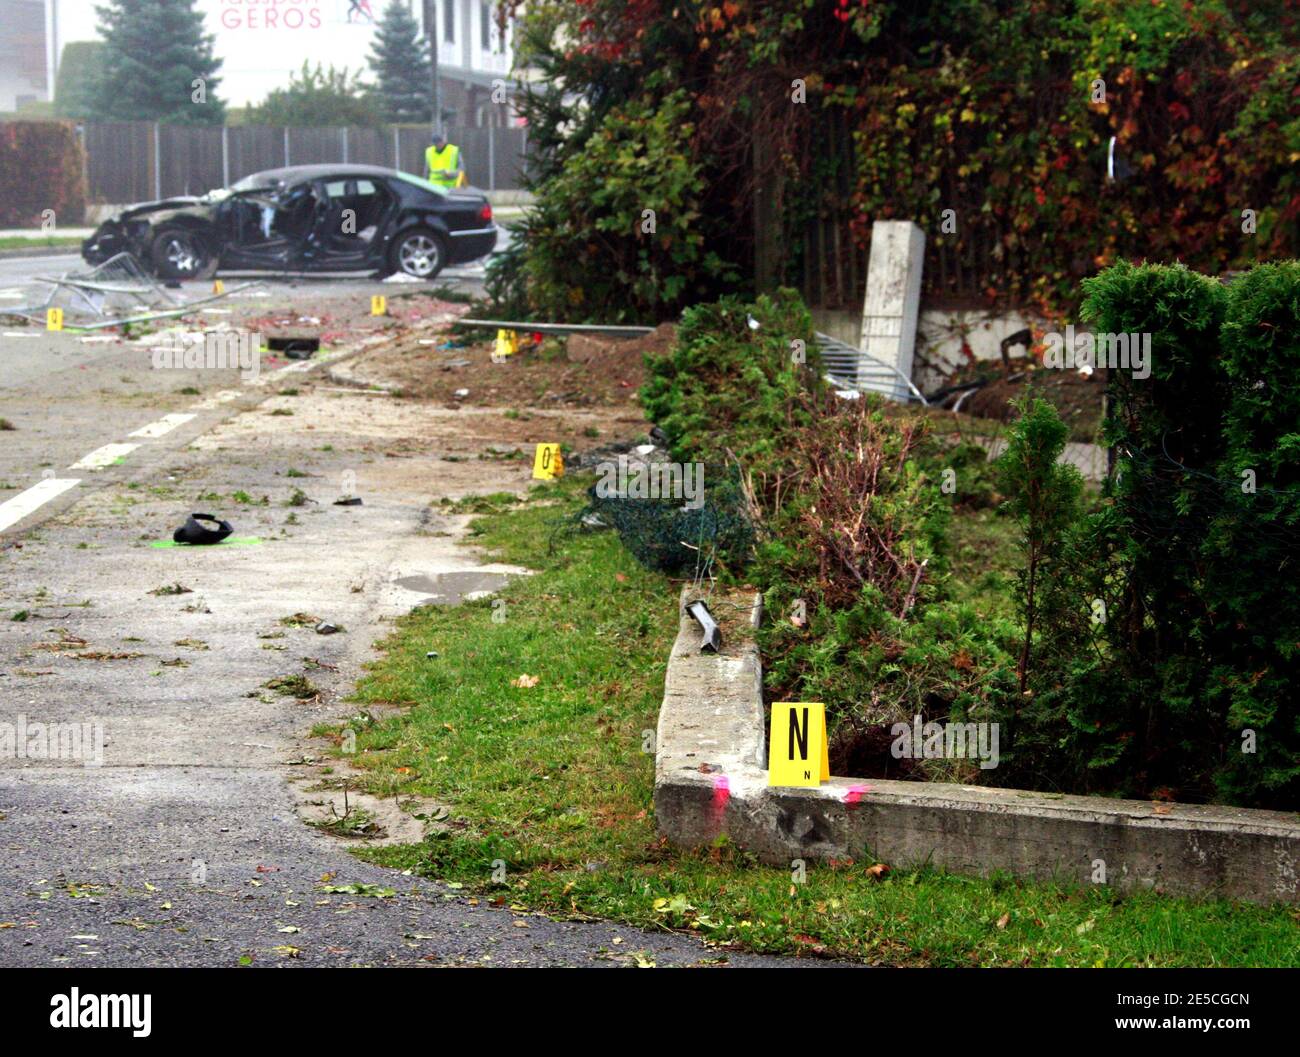 The wreckage of the car of the leader of Austria's Buendnis Zukunft Oesterreich (BZOe) party (Alliance for Austria's future) Joerg Haider is seen in the village of Lambichl, near the Carinthian capital Klagenfurt, on October 11, 2008. The 58-year-old governor of Austria's Carinthia province died after suffering major head and chest injuries when the government car he was driving went out of control and rolled down an embankment. Haider was killed, two weeks after staging a major comeback in a national election. Photo by Gert Eggenberger/ABACAPRESS.COM Stock Photo